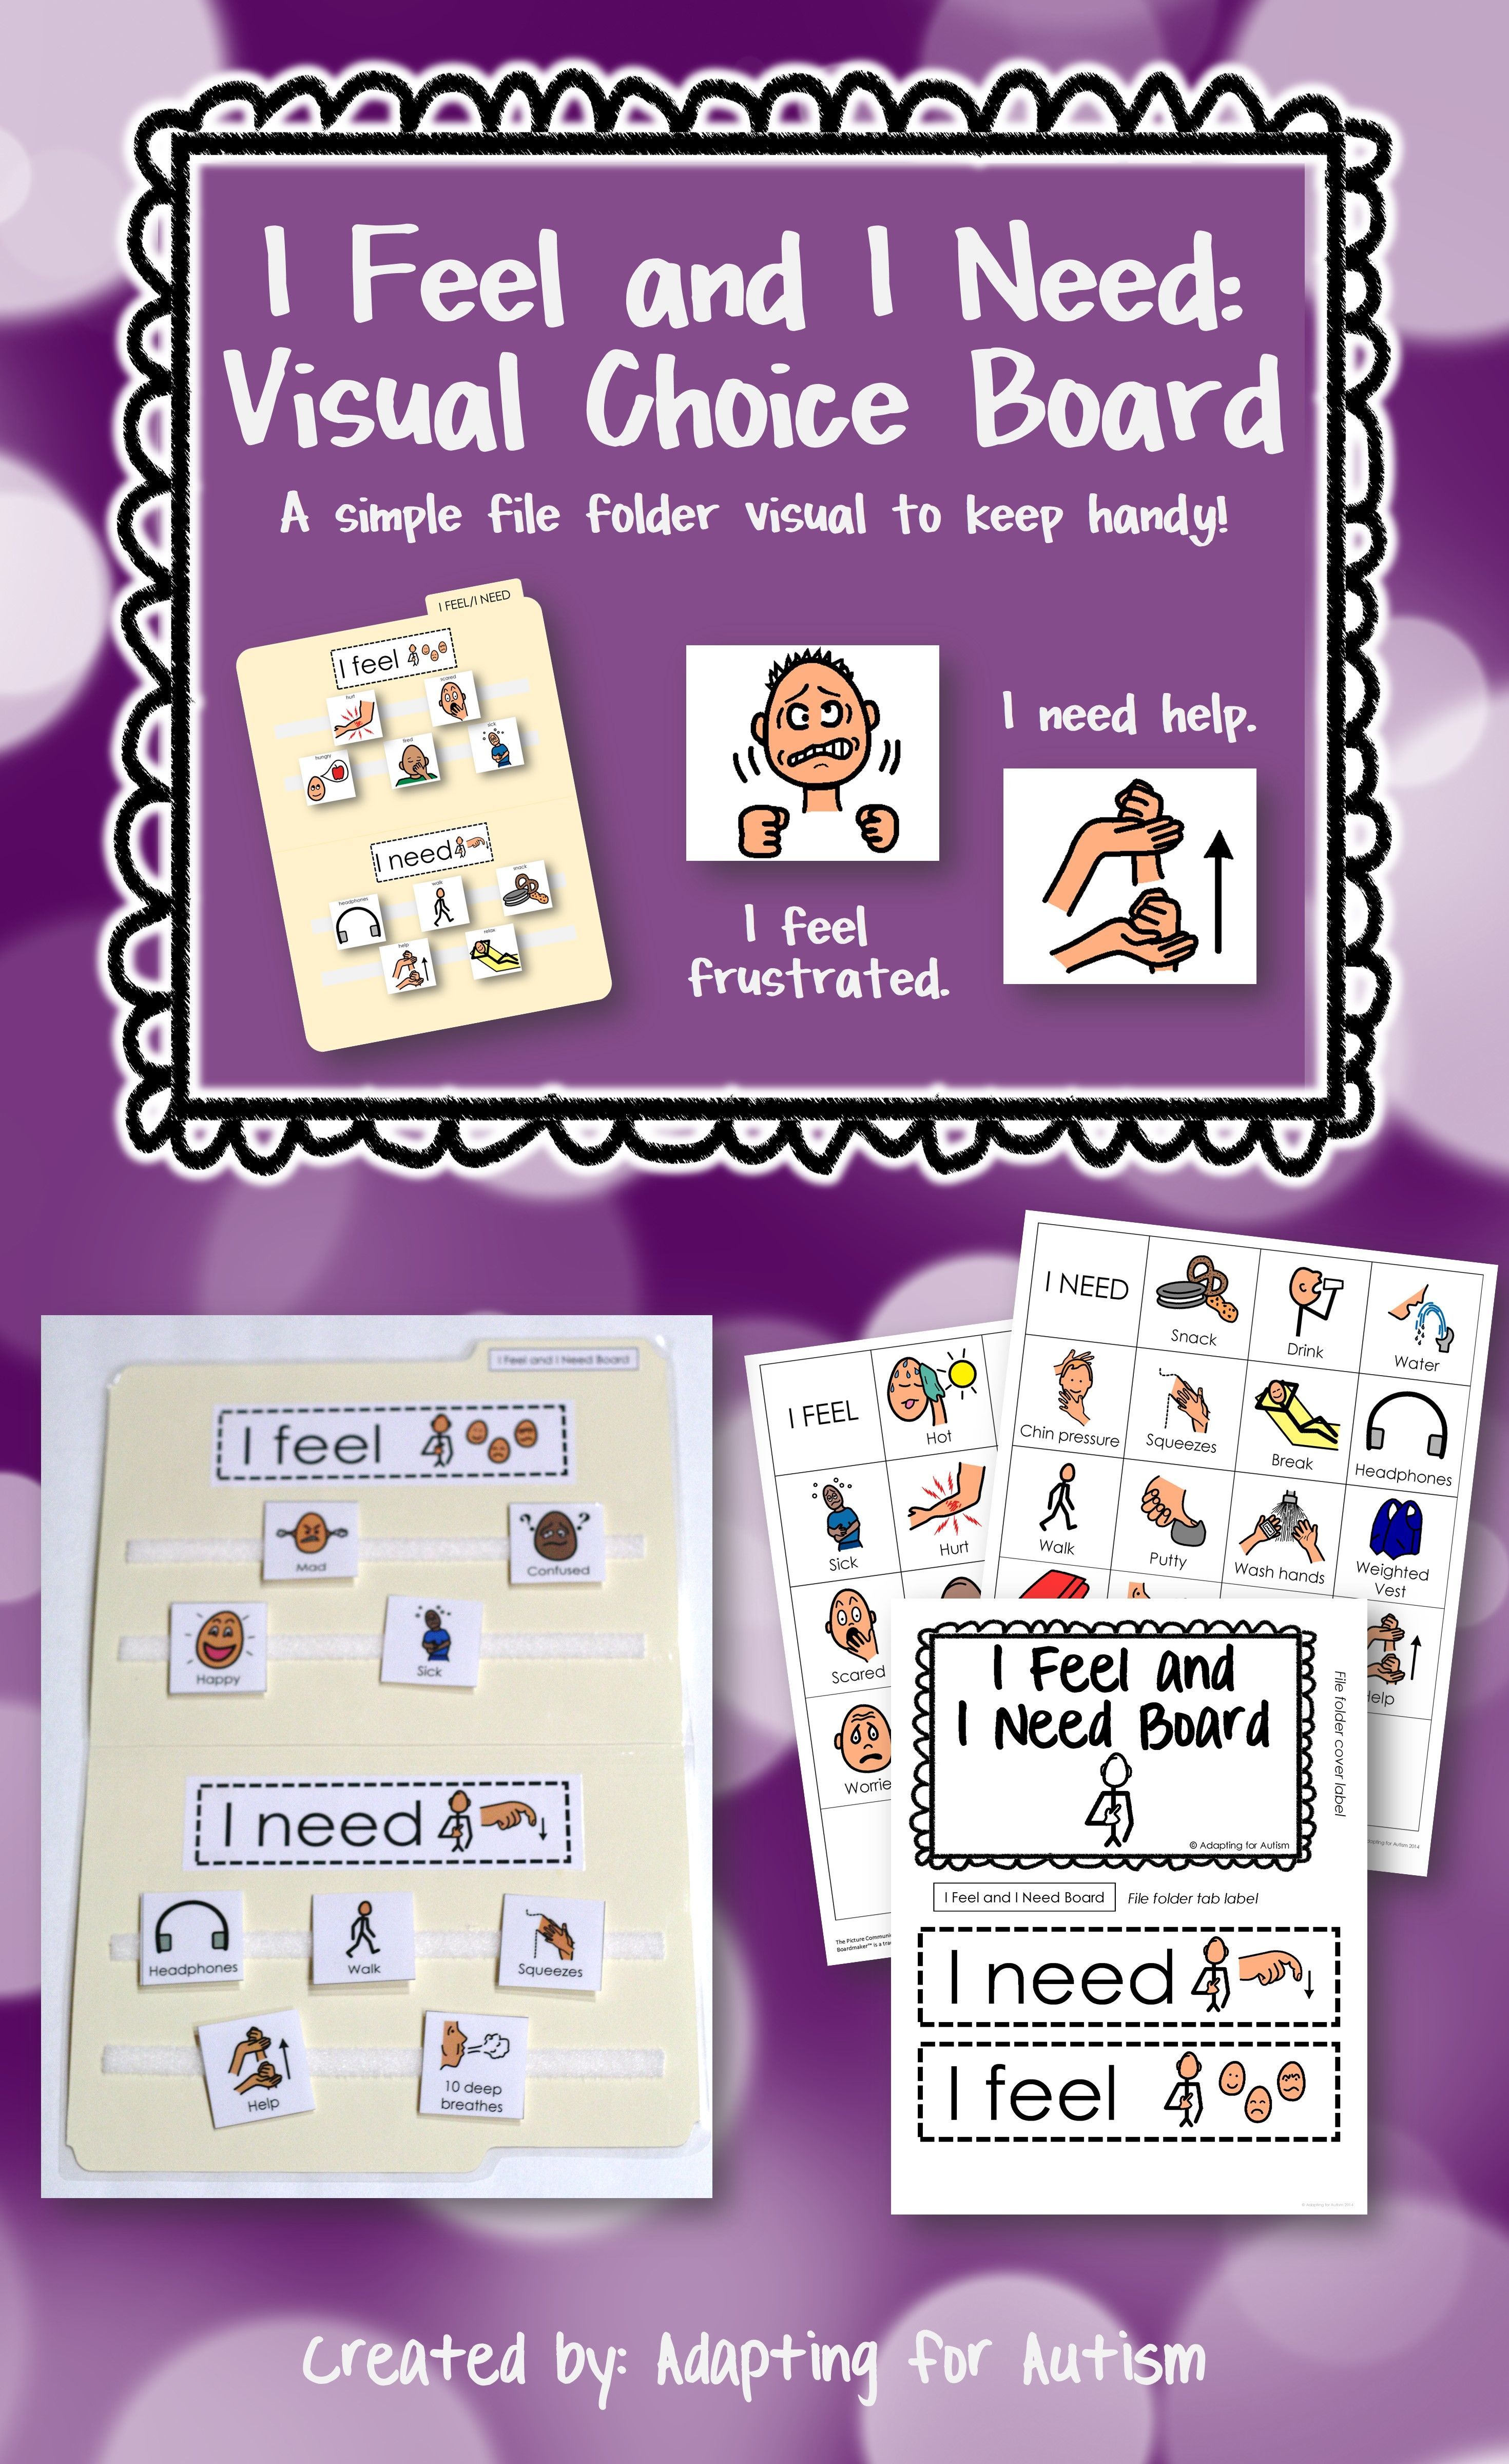 This I Feel and I Need Visual Choice Board is a simple resource to keep handy. Providing a student with a visual support may allow him to express his needs without having to find the words. Even